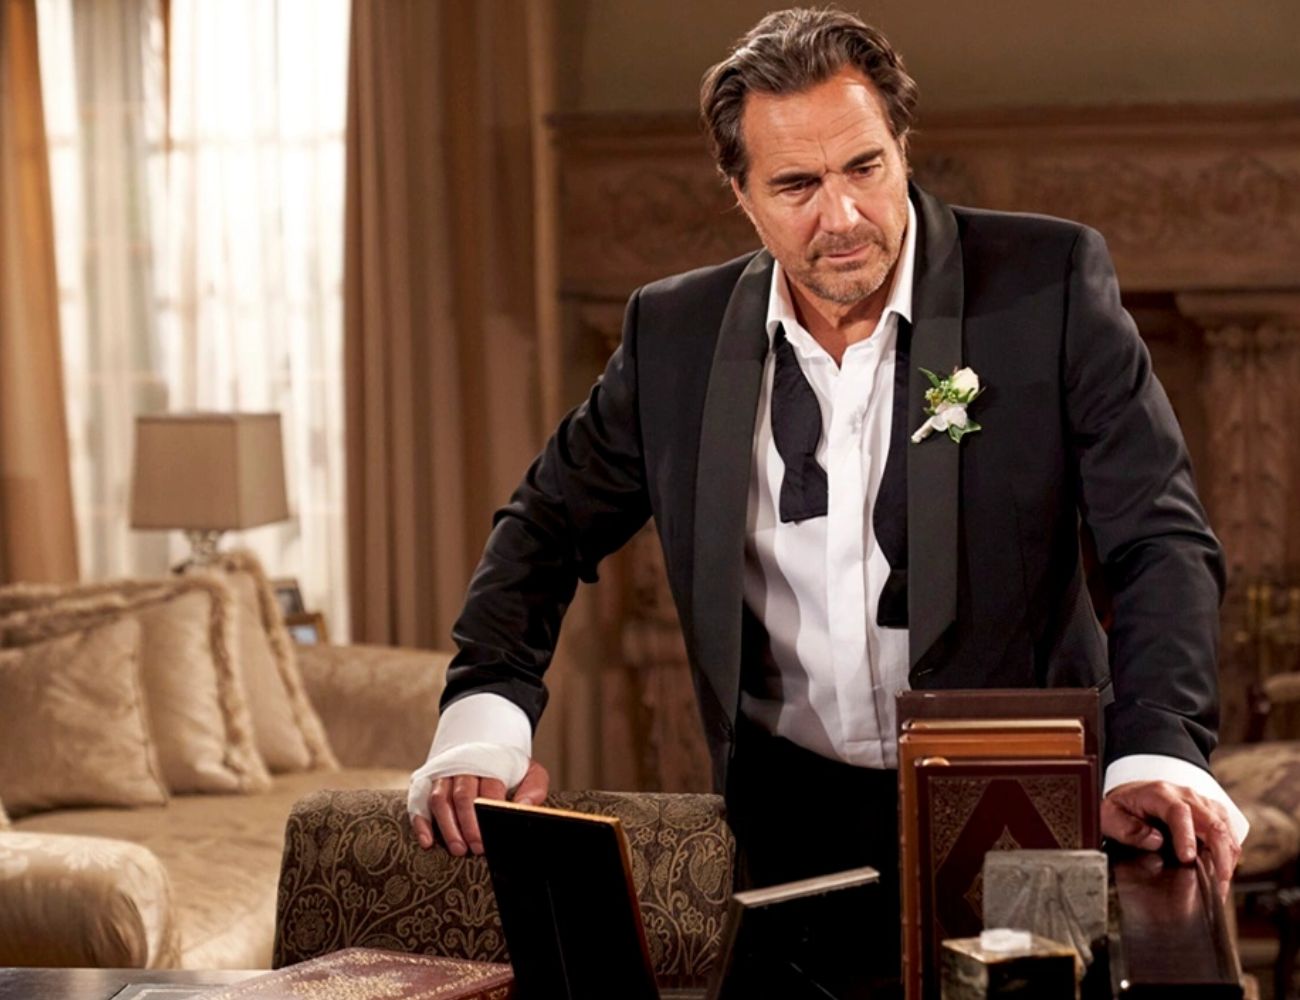 A still from the Bold and the Beautiful with Ridge in a tuxedo looking somber